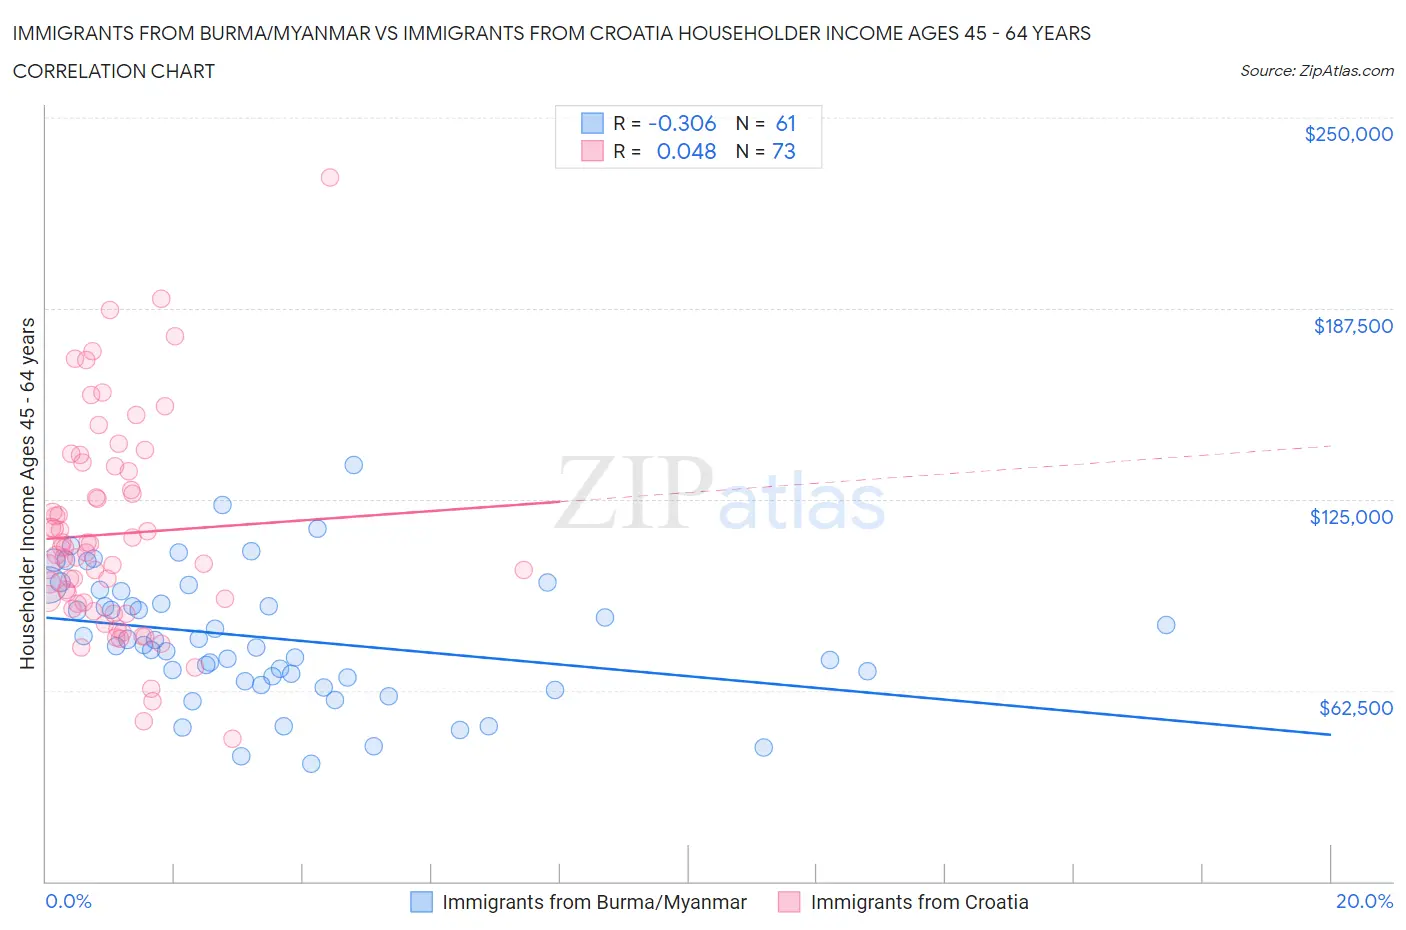 Immigrants from Burma/Myanmar vs Immigrants from Croatia Householder Income Ages 45 - 64 years